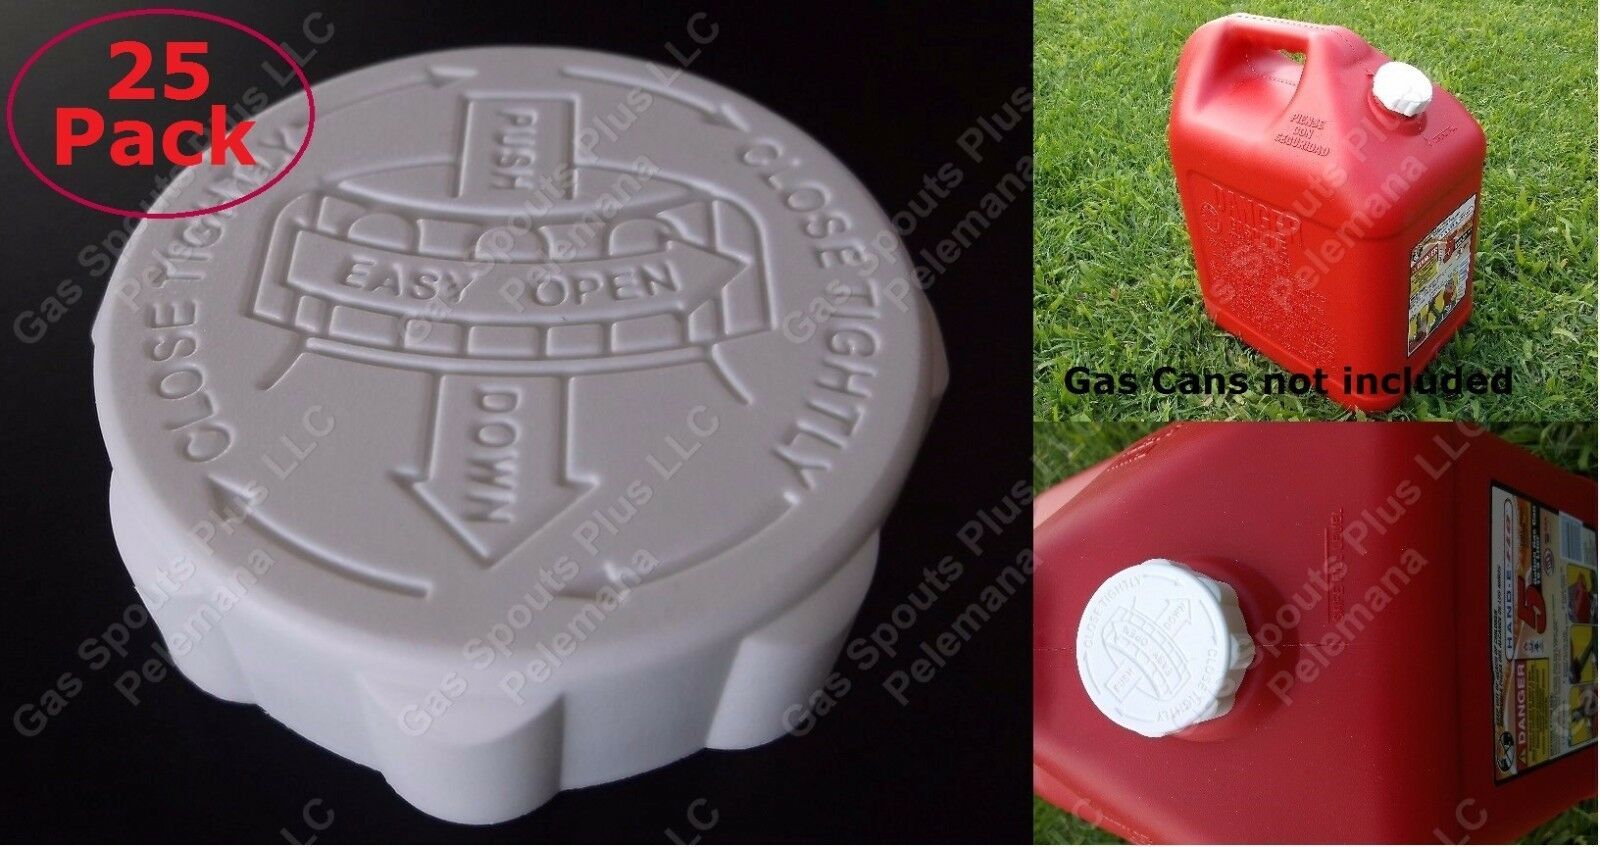 Primary image for 25-Pack BLITZ Gas Can CAPS ONLY Heavy Duty SAFETY GALLON LID Rubber Viton Gasket